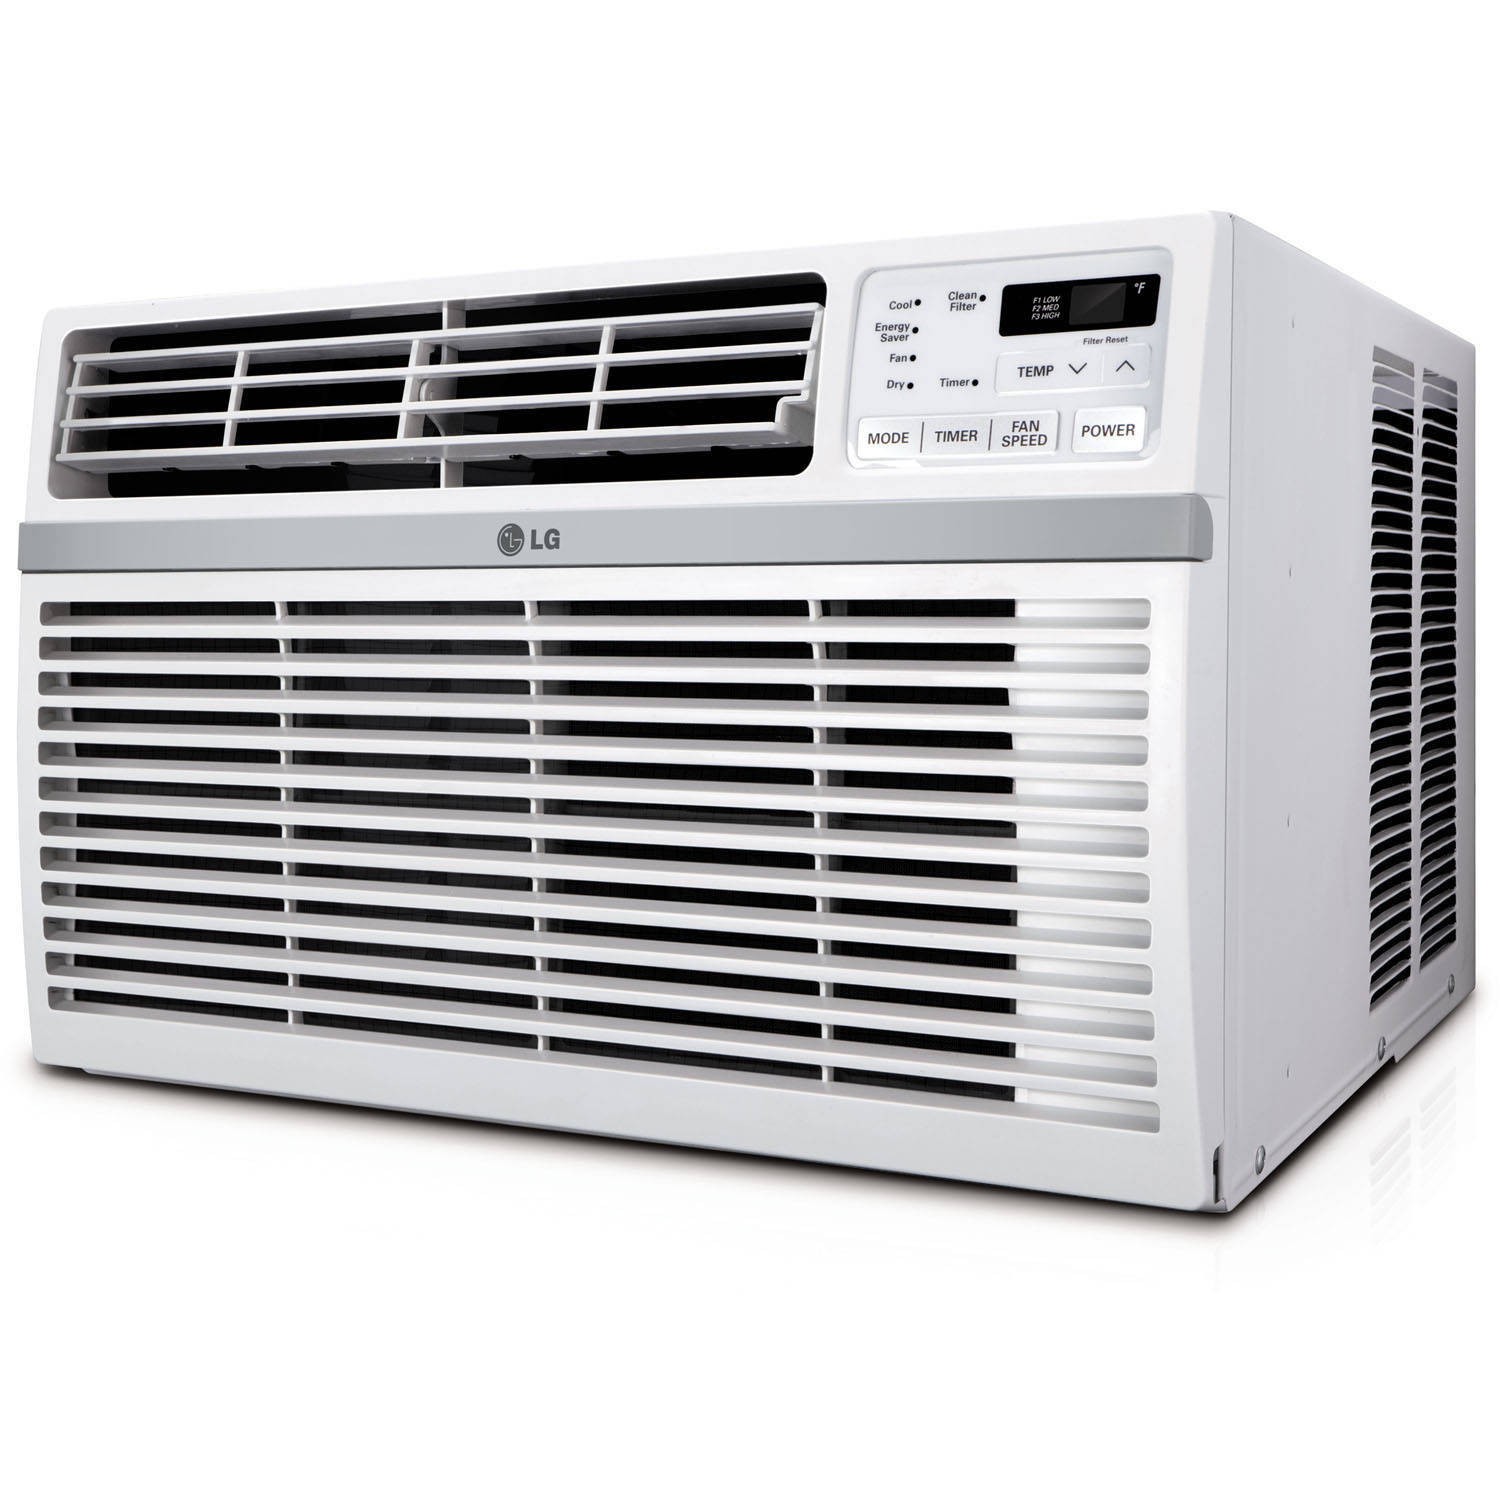 LG 24,500 BTU Window Air Conditioner, 1,560 Sq.ft. (39'x40' Room Size), Remote, 230/208V - image 3 of 11